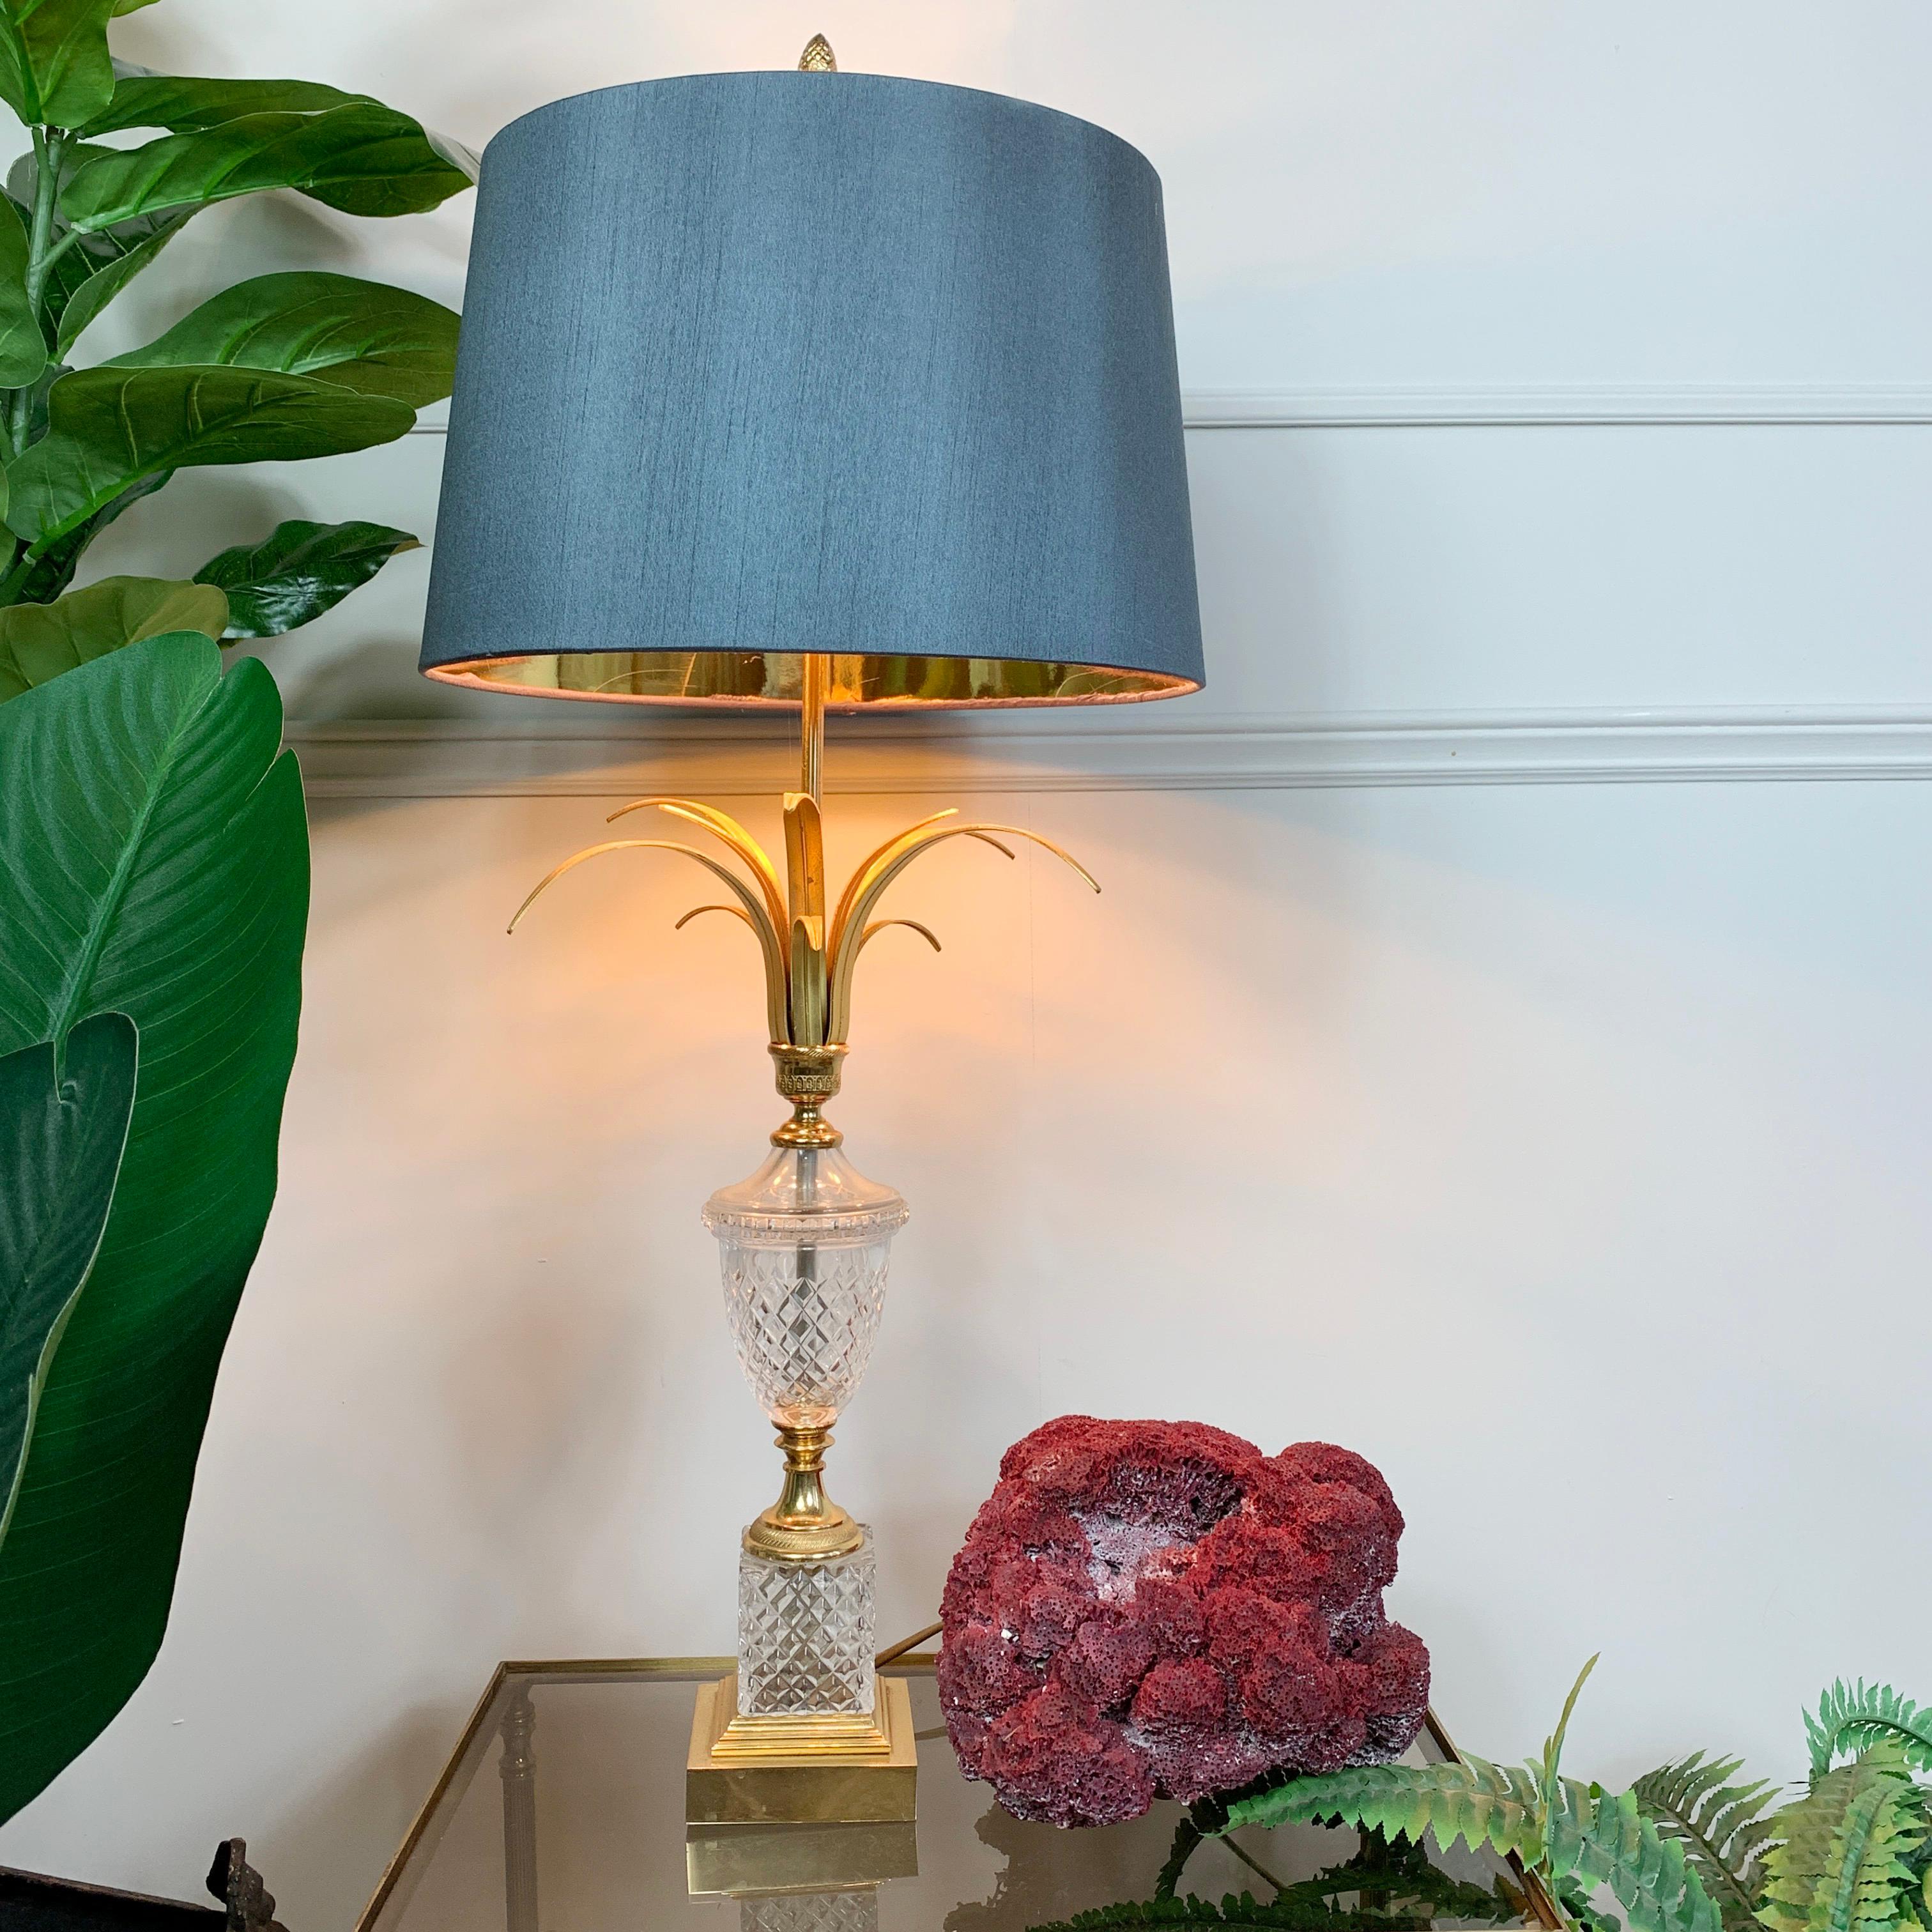 S A Boulanger table lamp, C 1970/80s

Gold And Crystal Glass Lamp Base With Gold Frond
The Top Of The Stem Has The Classic Boulanger Pineapple Finial 

The Shade Is A Modern Replacement In Graphite Grey With Gold Inner, This Can Be Removed